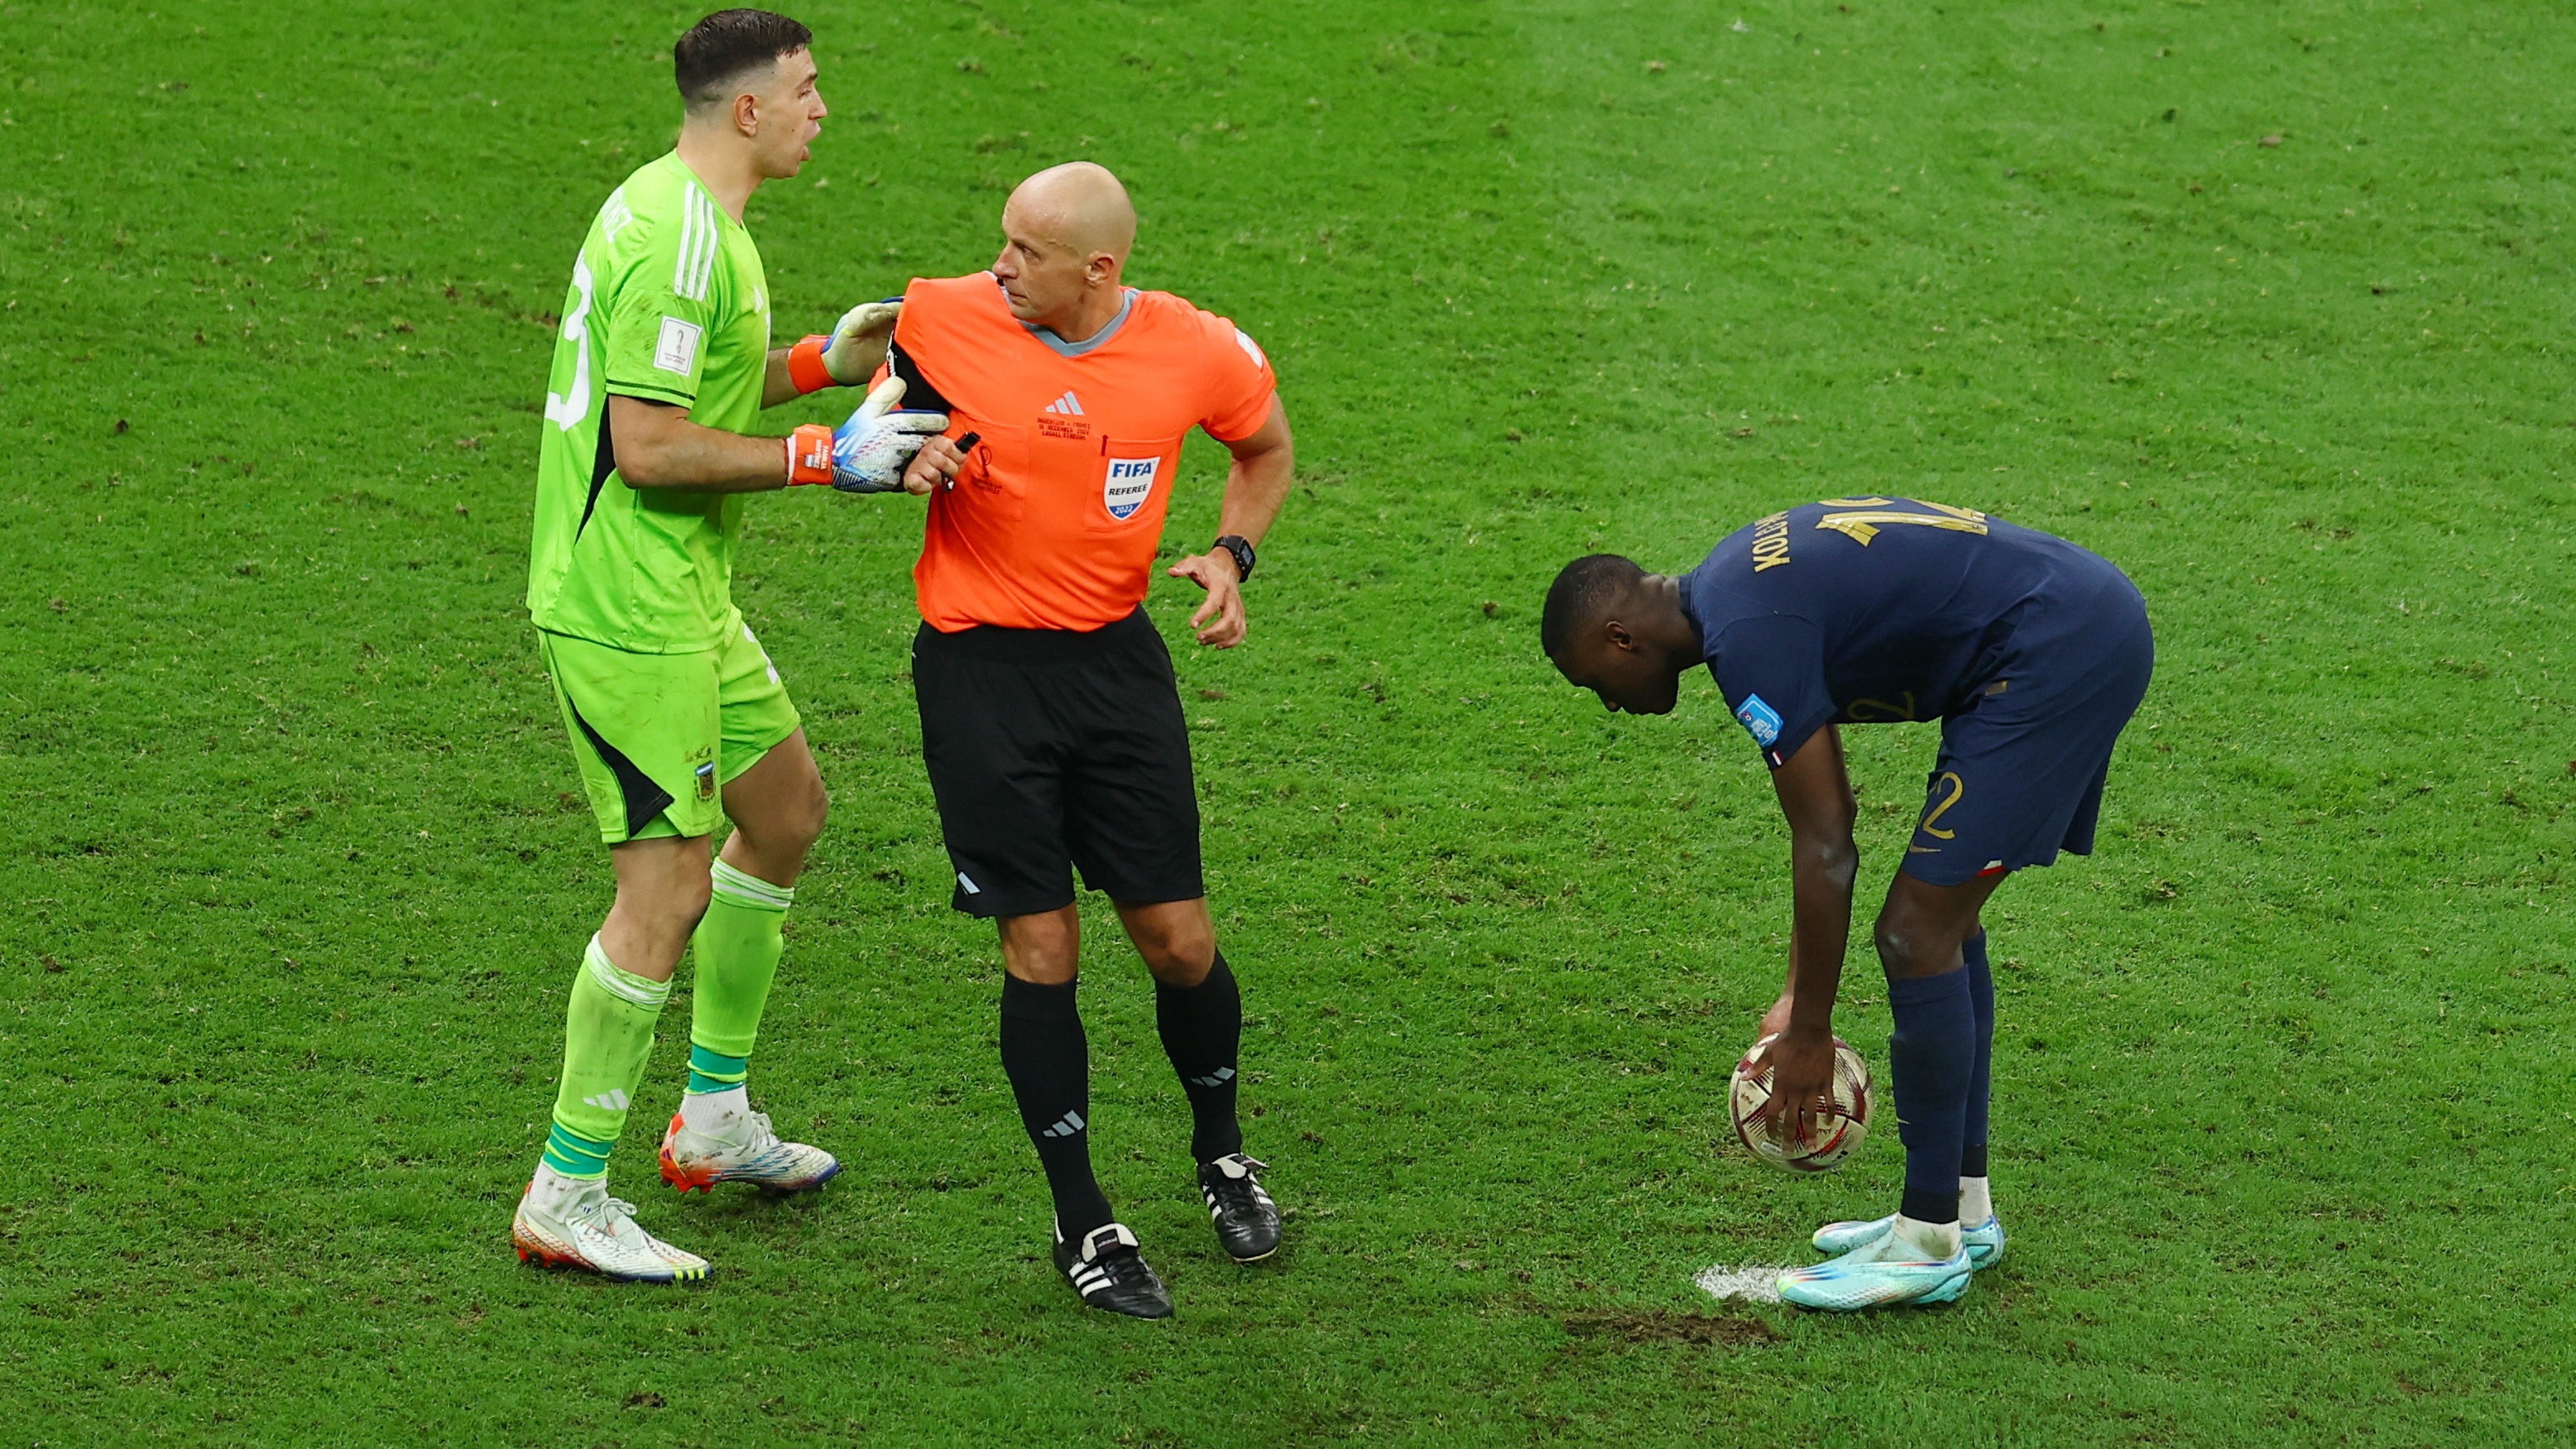 Dibu Martínez and his cross with Randal Kolo Muani in the penalty shootout before France (Photo: Reuters/Molly Darlington)